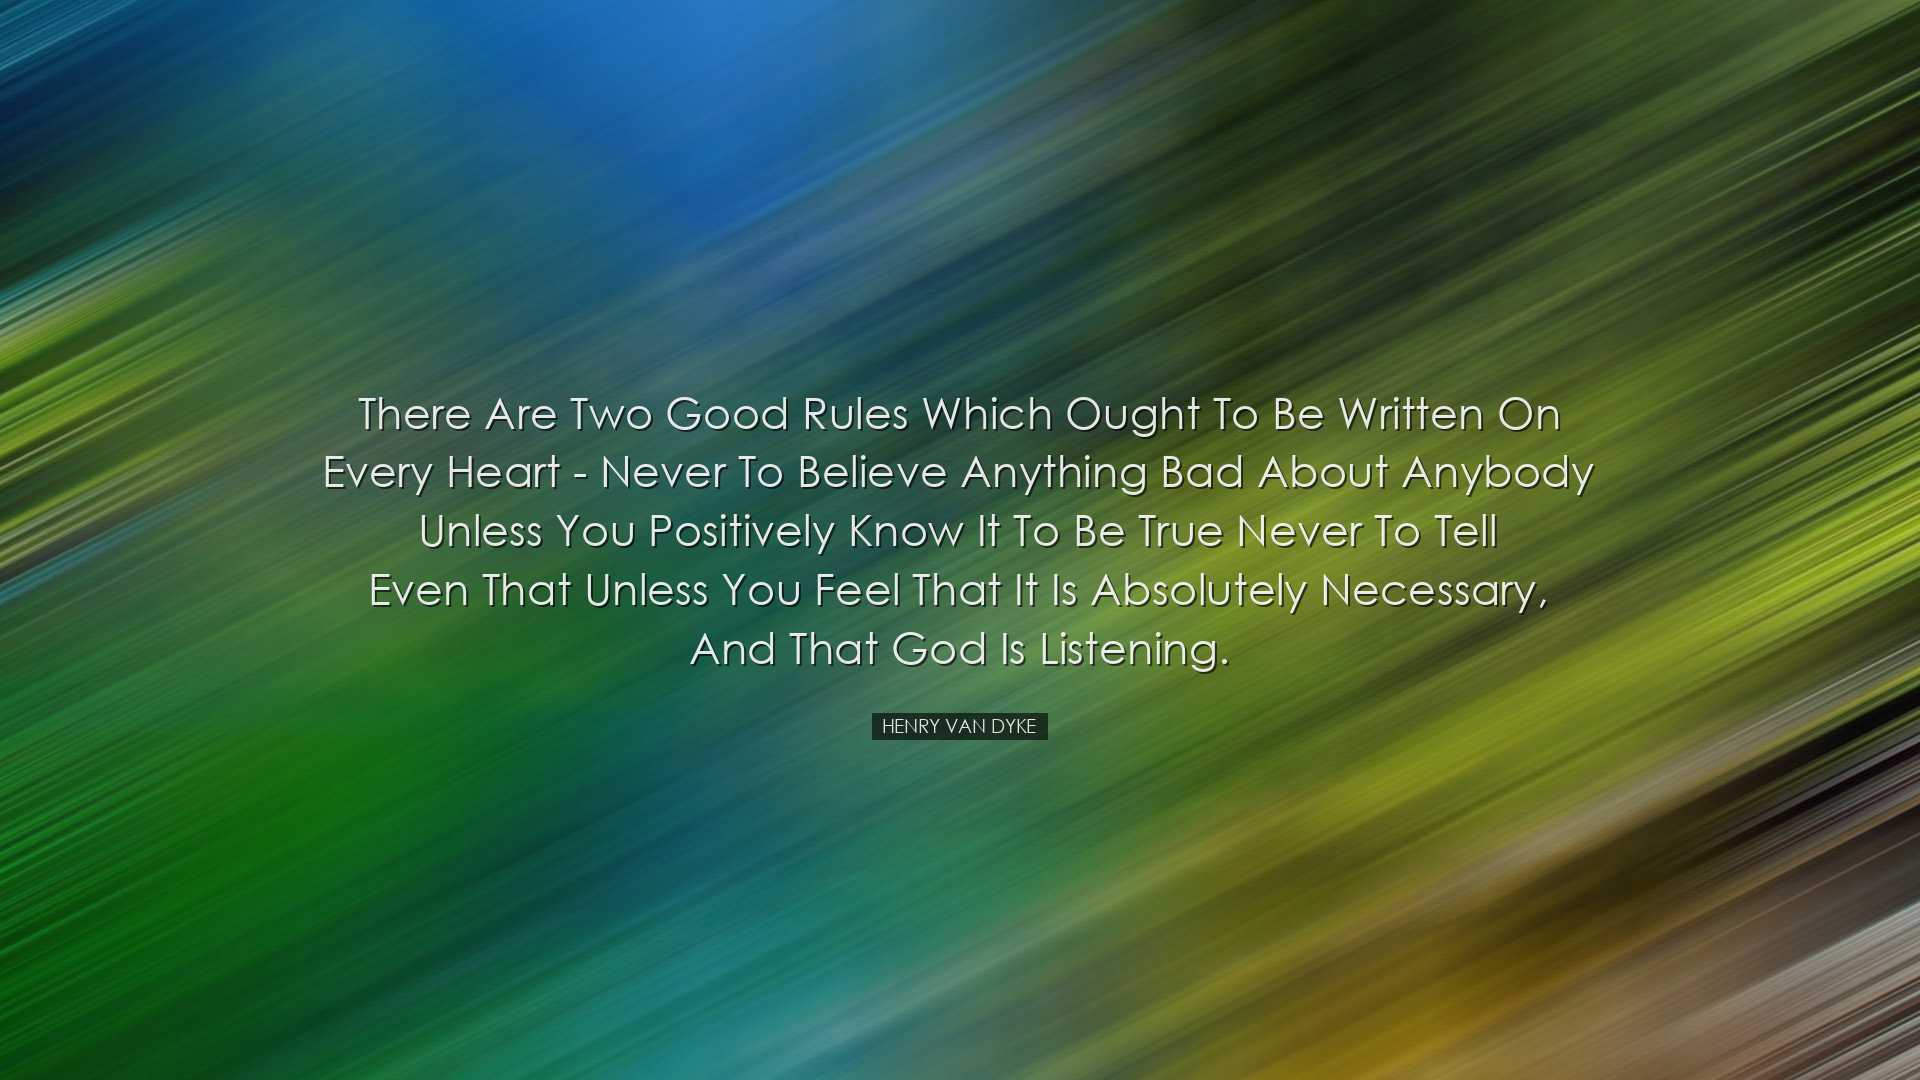 There are two good rules which ought to be written on every heart